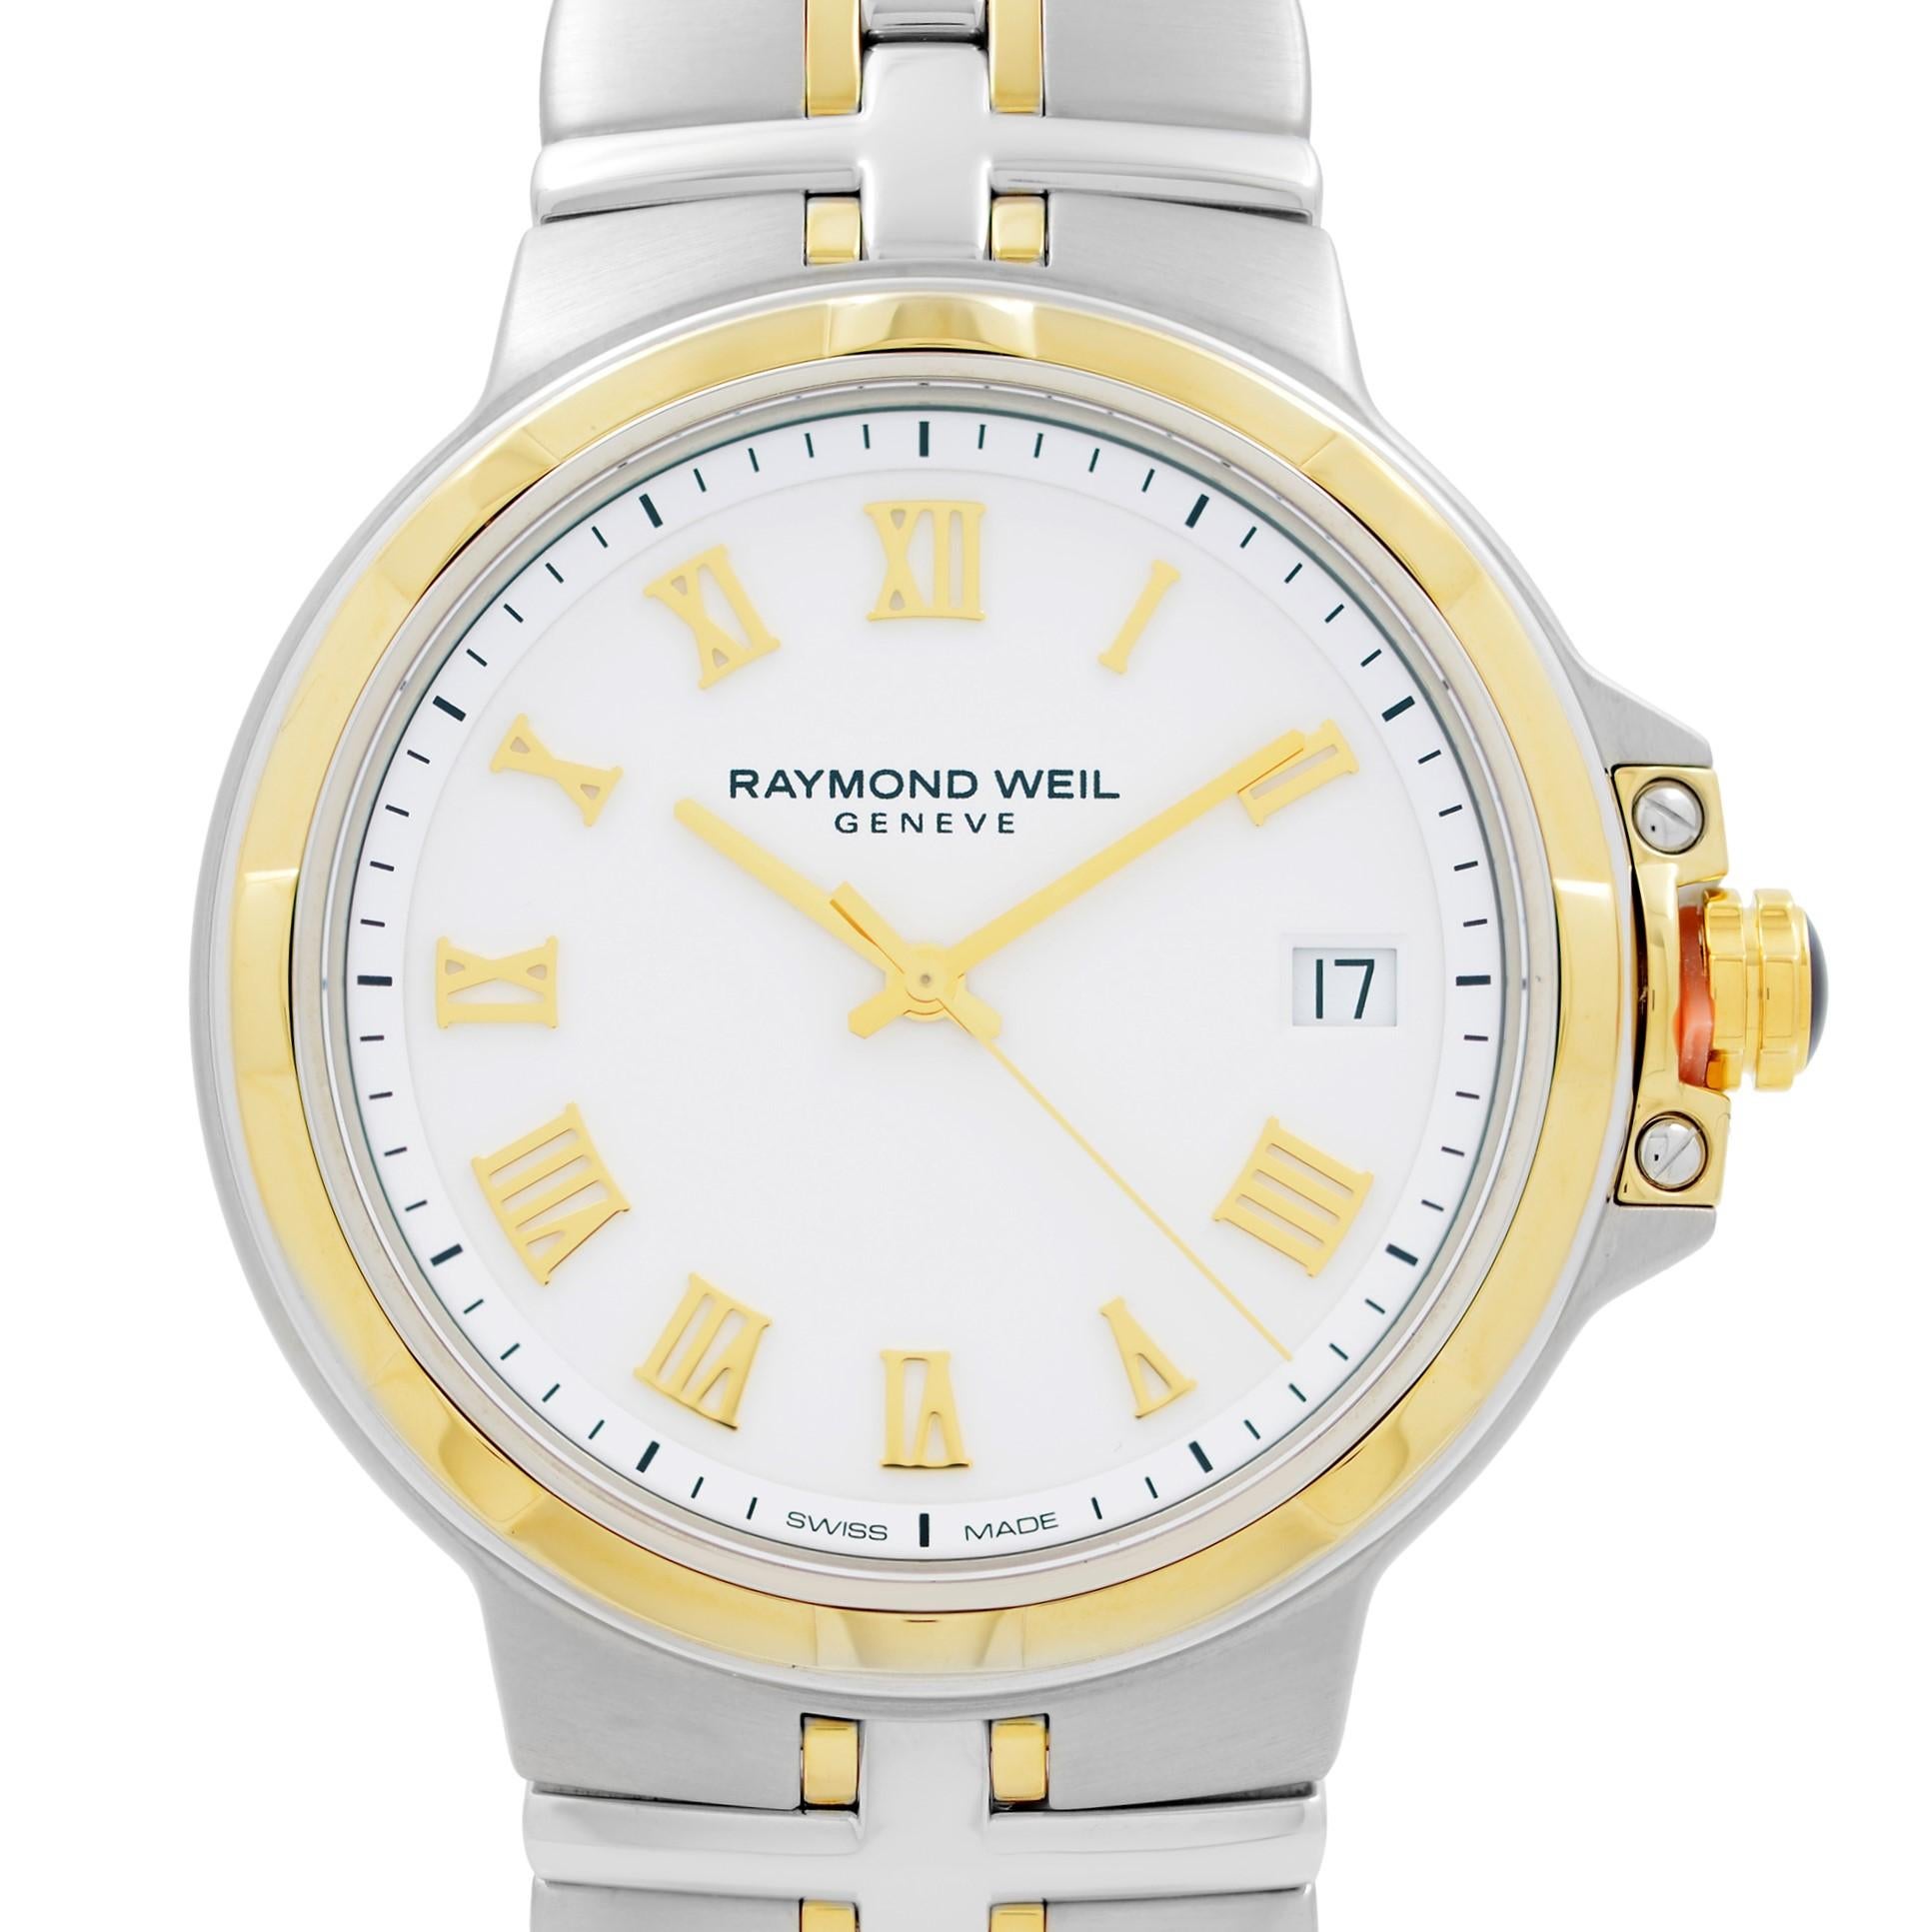 Store Display Model Never Worn Raymond Weil Parsifal Two-Tone Steel White Dial Quartz Men's Watch 5580-STP-00308. This Beautiful Timepiece Features: Stainless Steel Case with a Two-Tone (Silver-Tone and Yellow Gold PVD) Stainless Steel Bracelet,